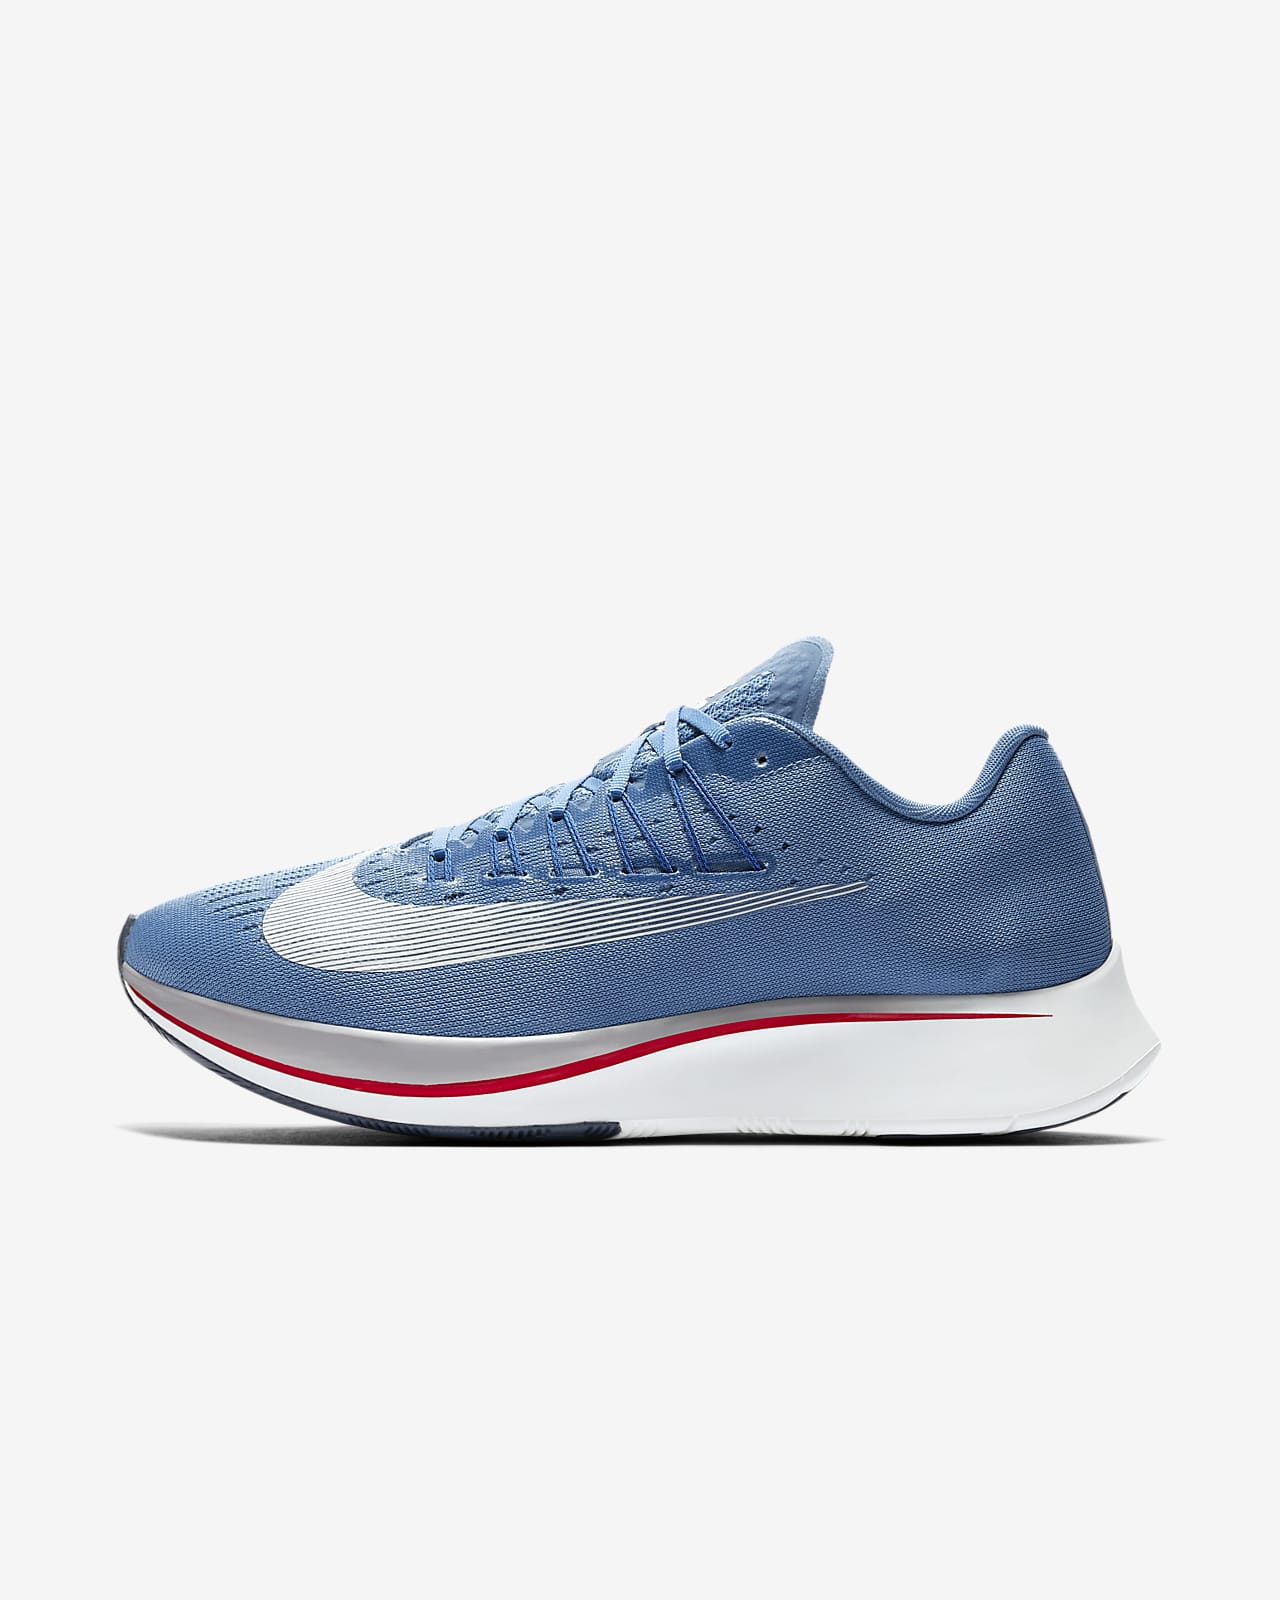 Nike Zoom Fly Men's Road Racing Shoes